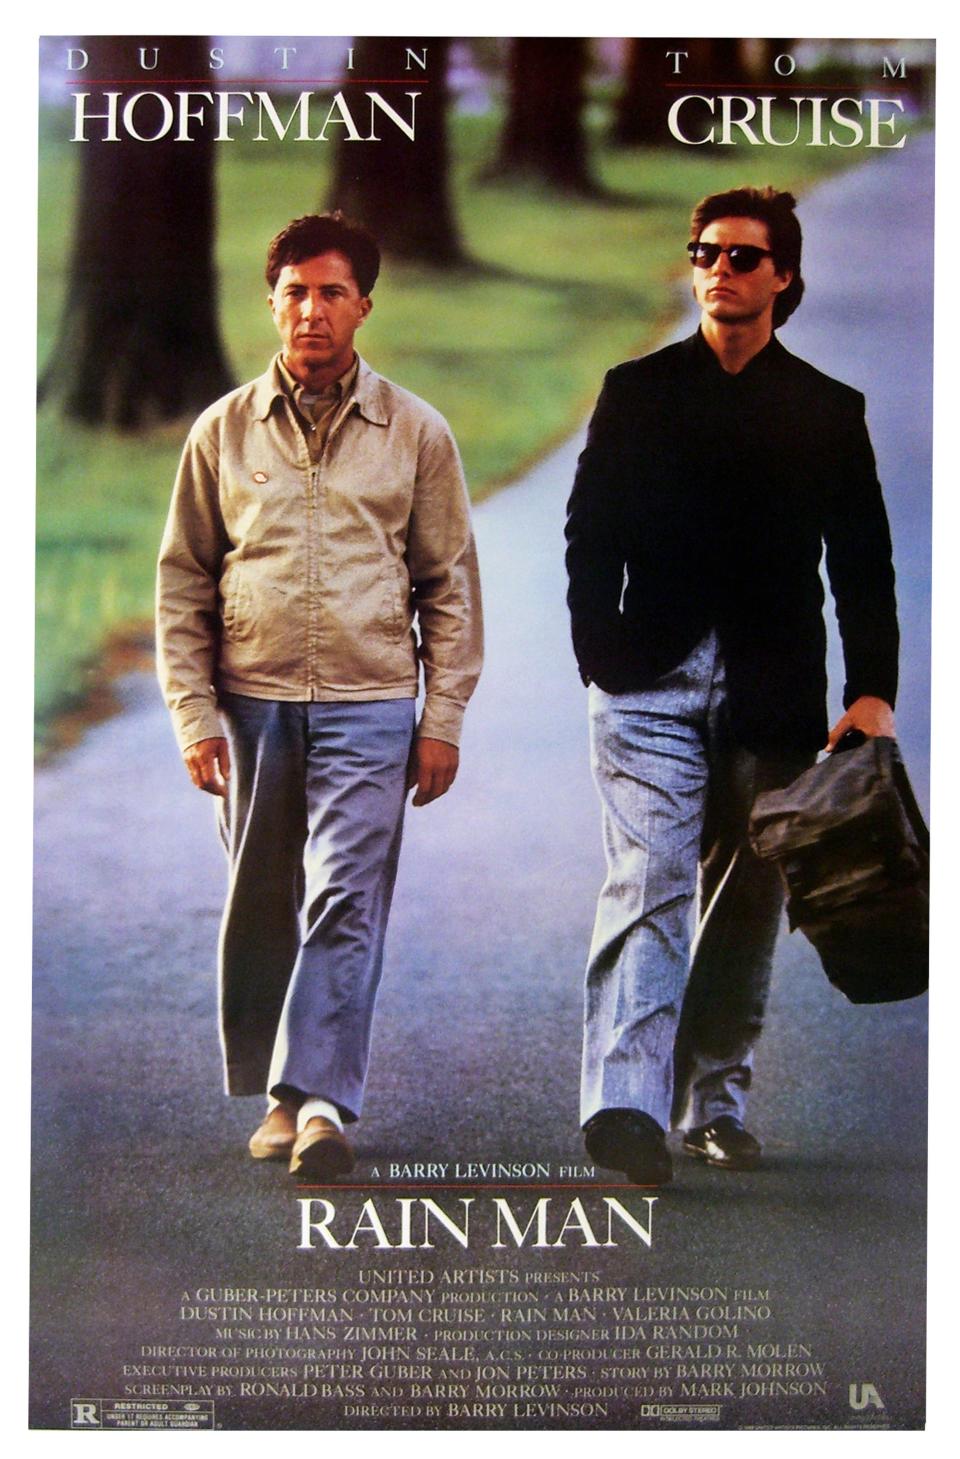 The poster for the 1998 movie "Rain Man," starring Dustin Hoffman and Tom Cruise. The movie was the highest-grossing film of the year and won four Oscars, including Best Actor for Hoffman<span class="copyright">Universal Images Group via Getty</span>